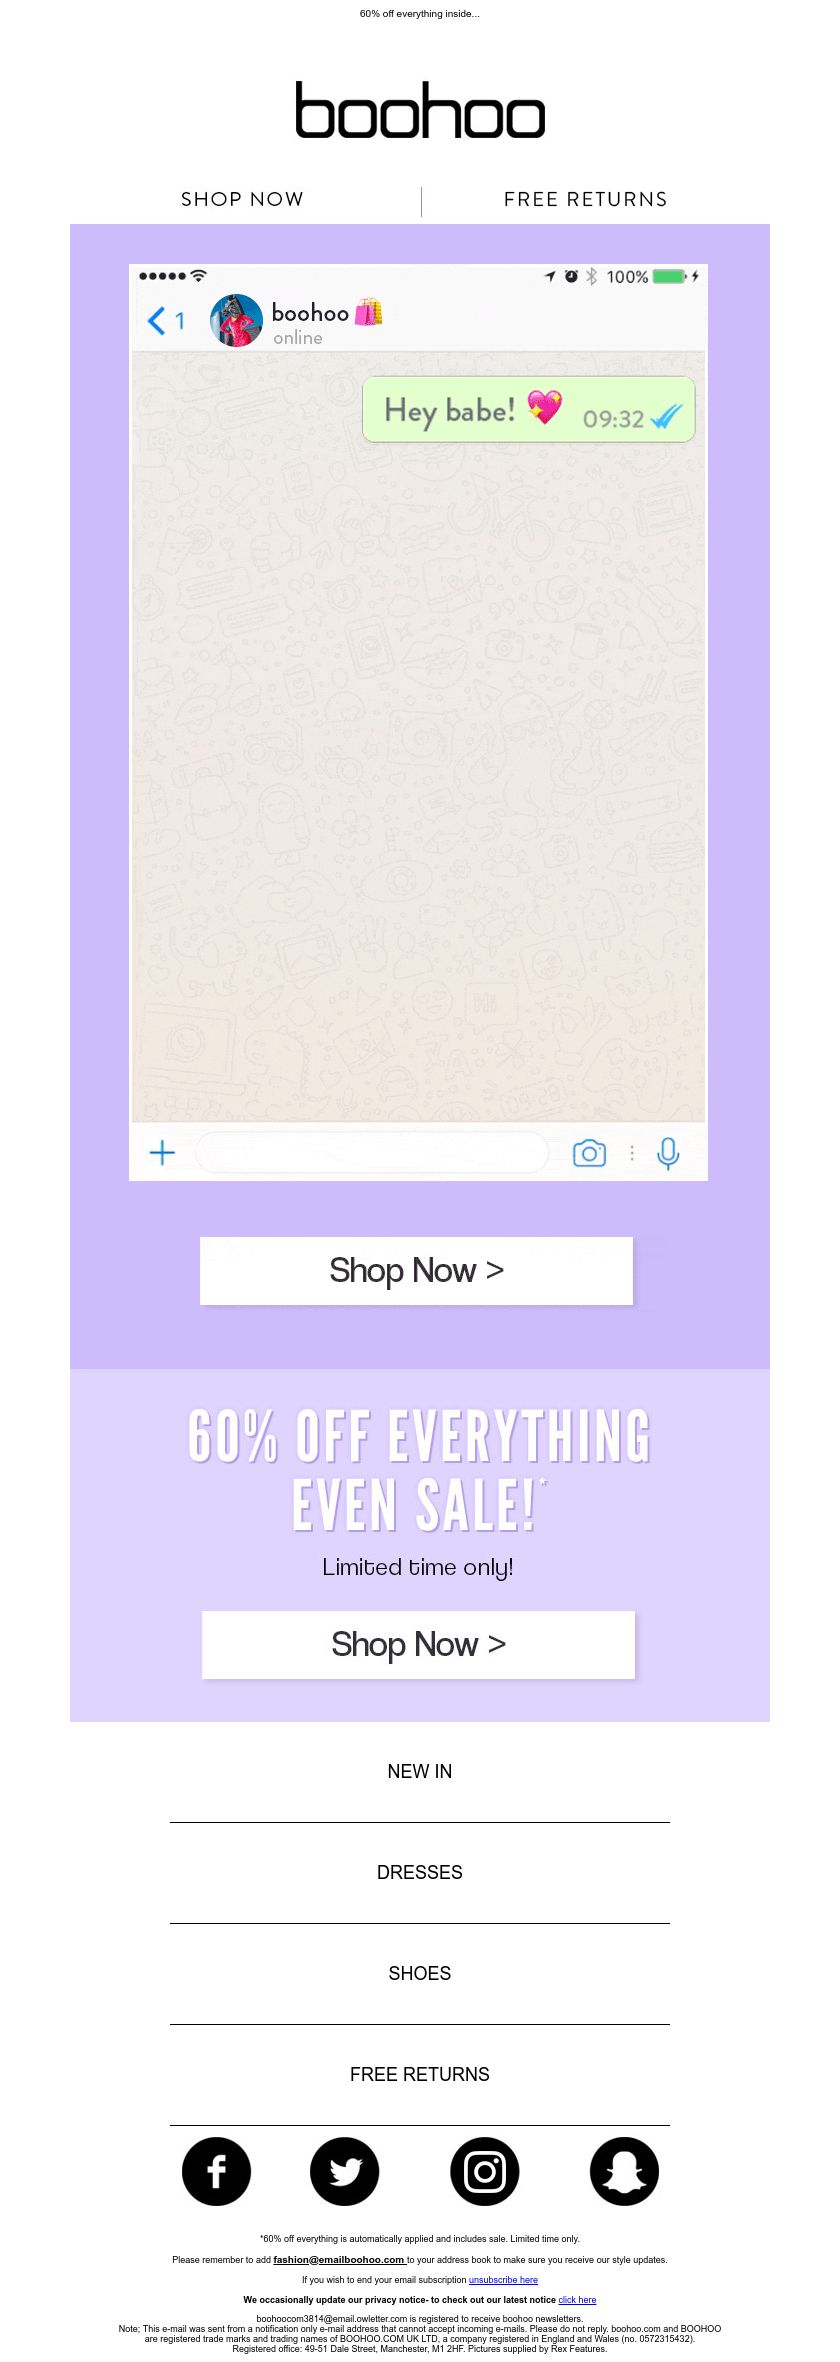 ecommerce email templates